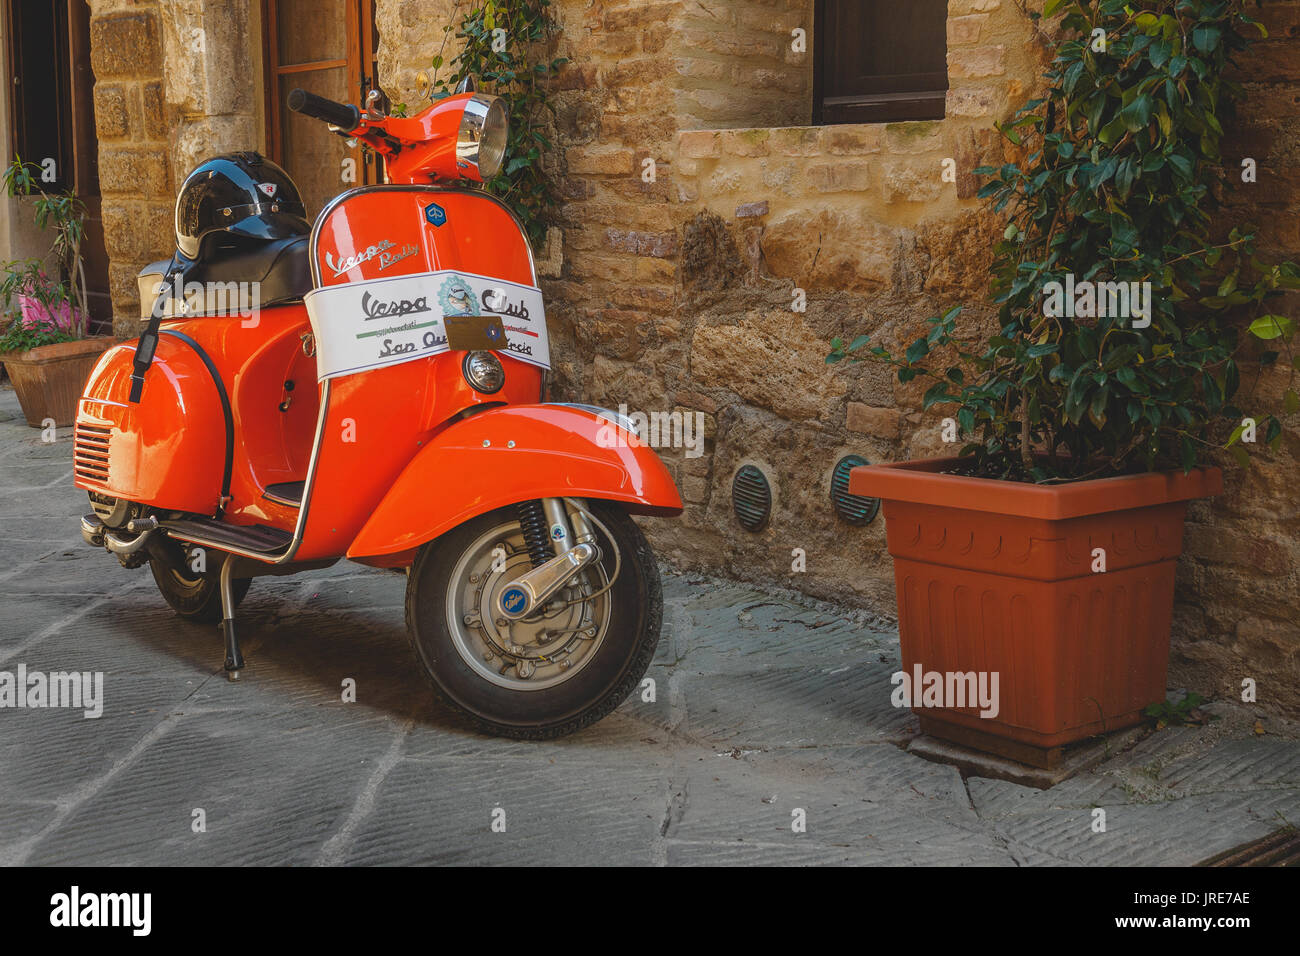 Vintage Vespa Piaggio parked in a street of a Tuscan town. Italy, 2017. Stock Photo